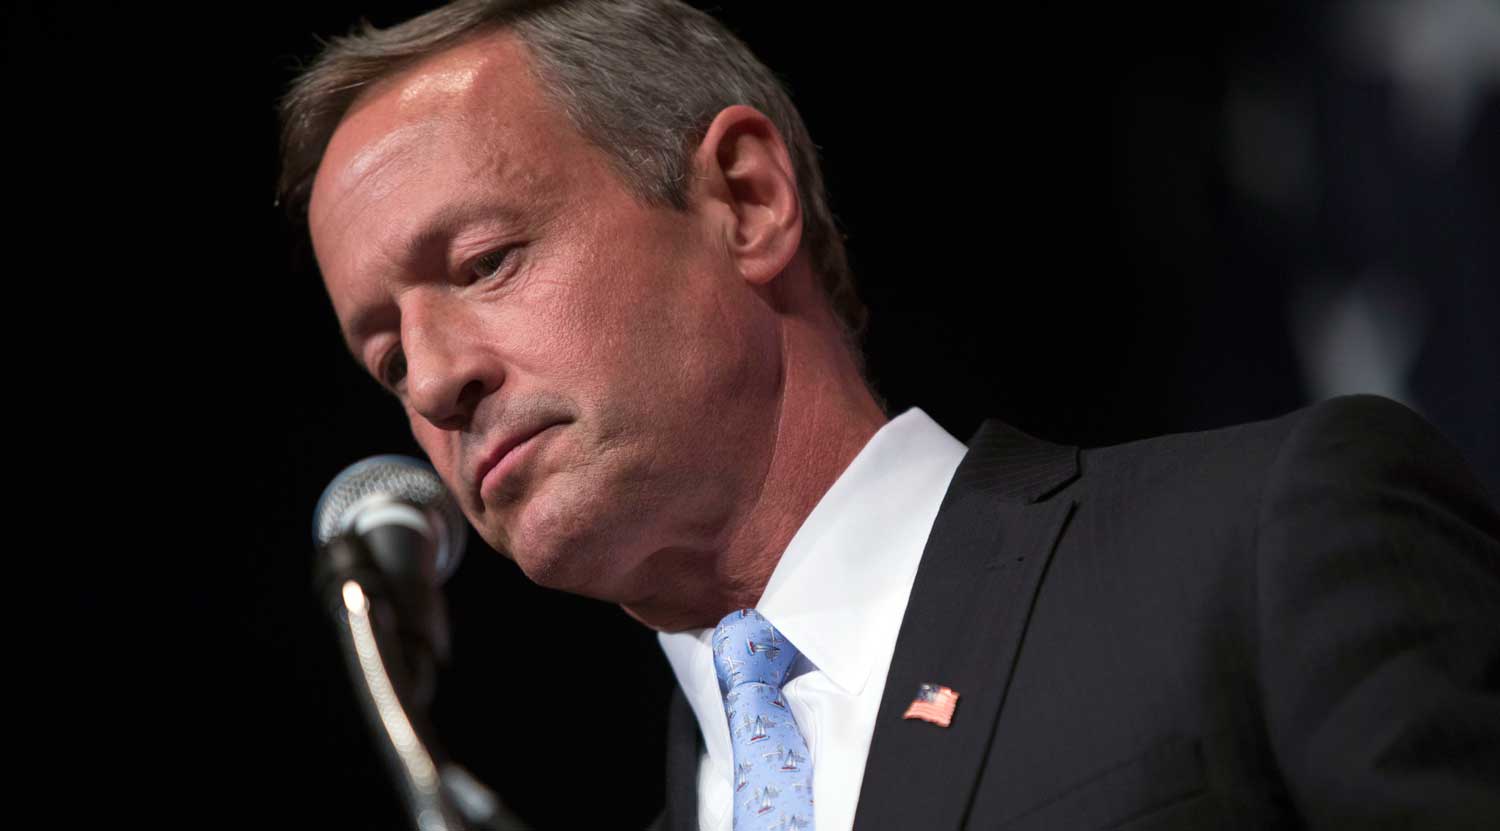 Martin O’Malley, former governor of Maryland and 2016 Democratic presidential candidate, pauses while speaking during the Democratic Wing Ding in Clear Lake, Iowa, U.S., on Friday, Aug. 14, 2015. The event, first held in 2004, raises funds for county Democratic Central Committees. Photographer: Daniel Acker/Bloomberg *** Local Caption *** Martin O'Malley
